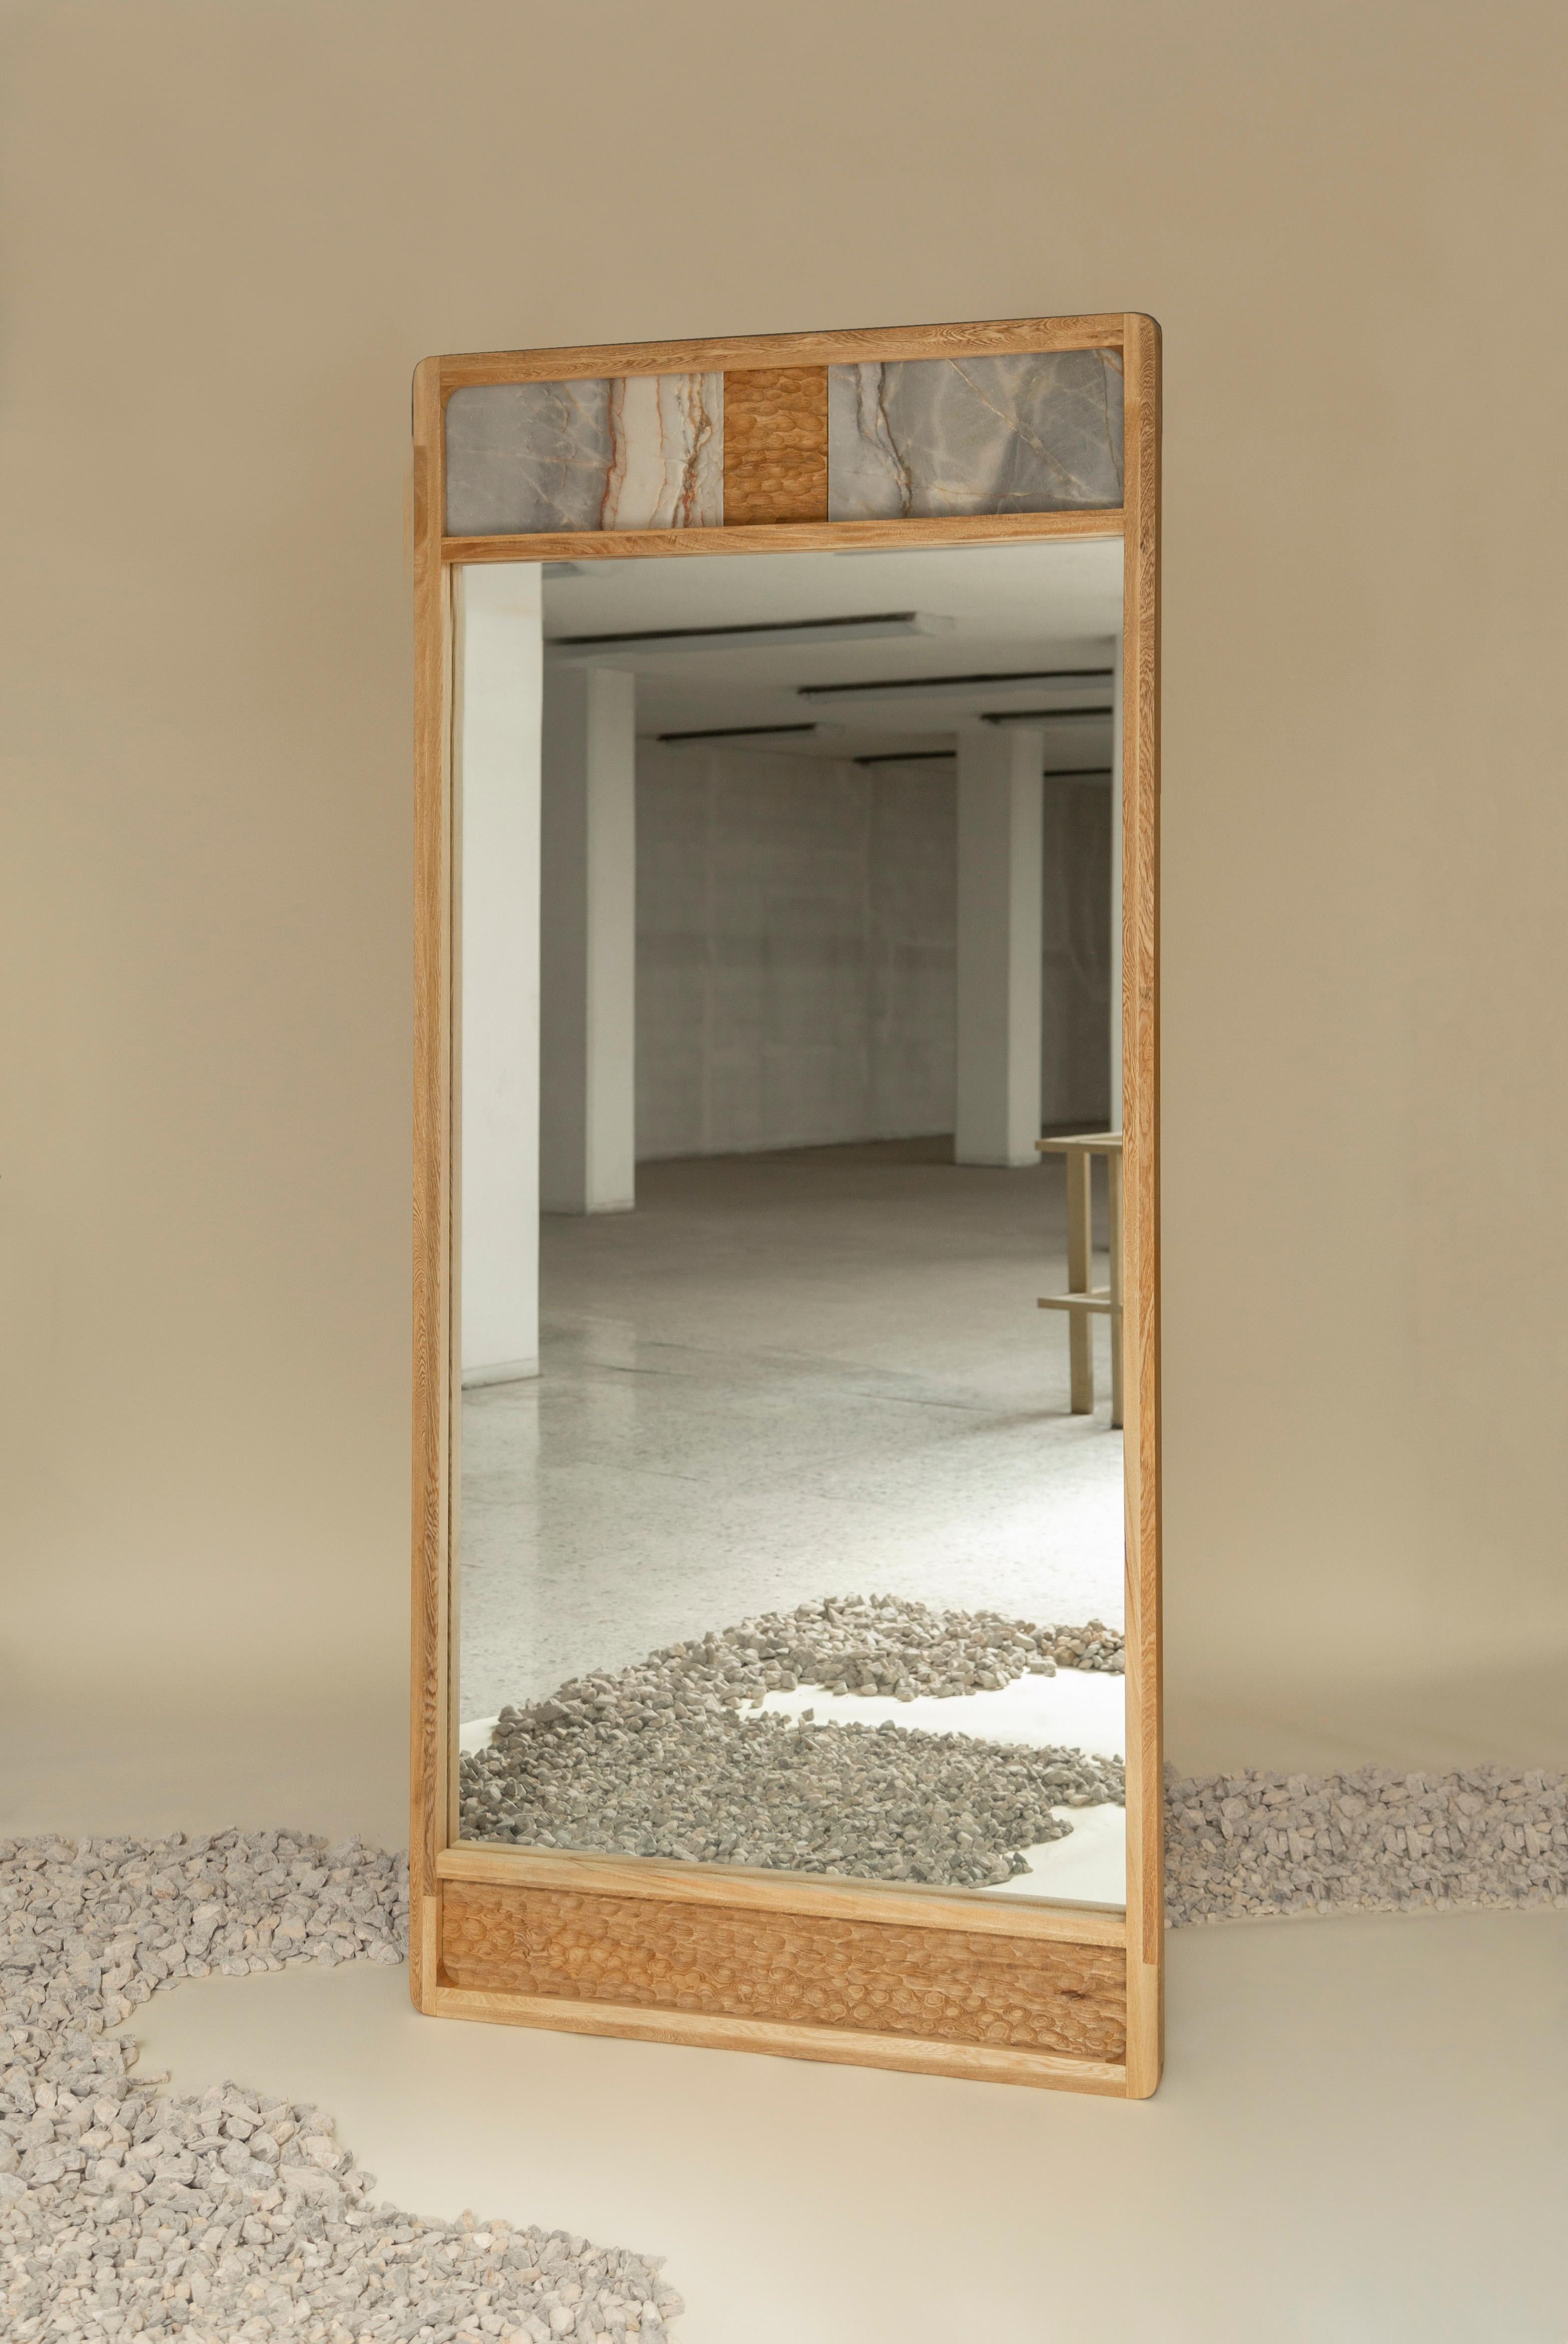 The Mojave floor mirror is made with Mexican Rosa Morada wood. It's hand crafted with great attention to detail. The mix of marble, wood and texture makes for an unforgettable piece. The design goes well with different style rooms.